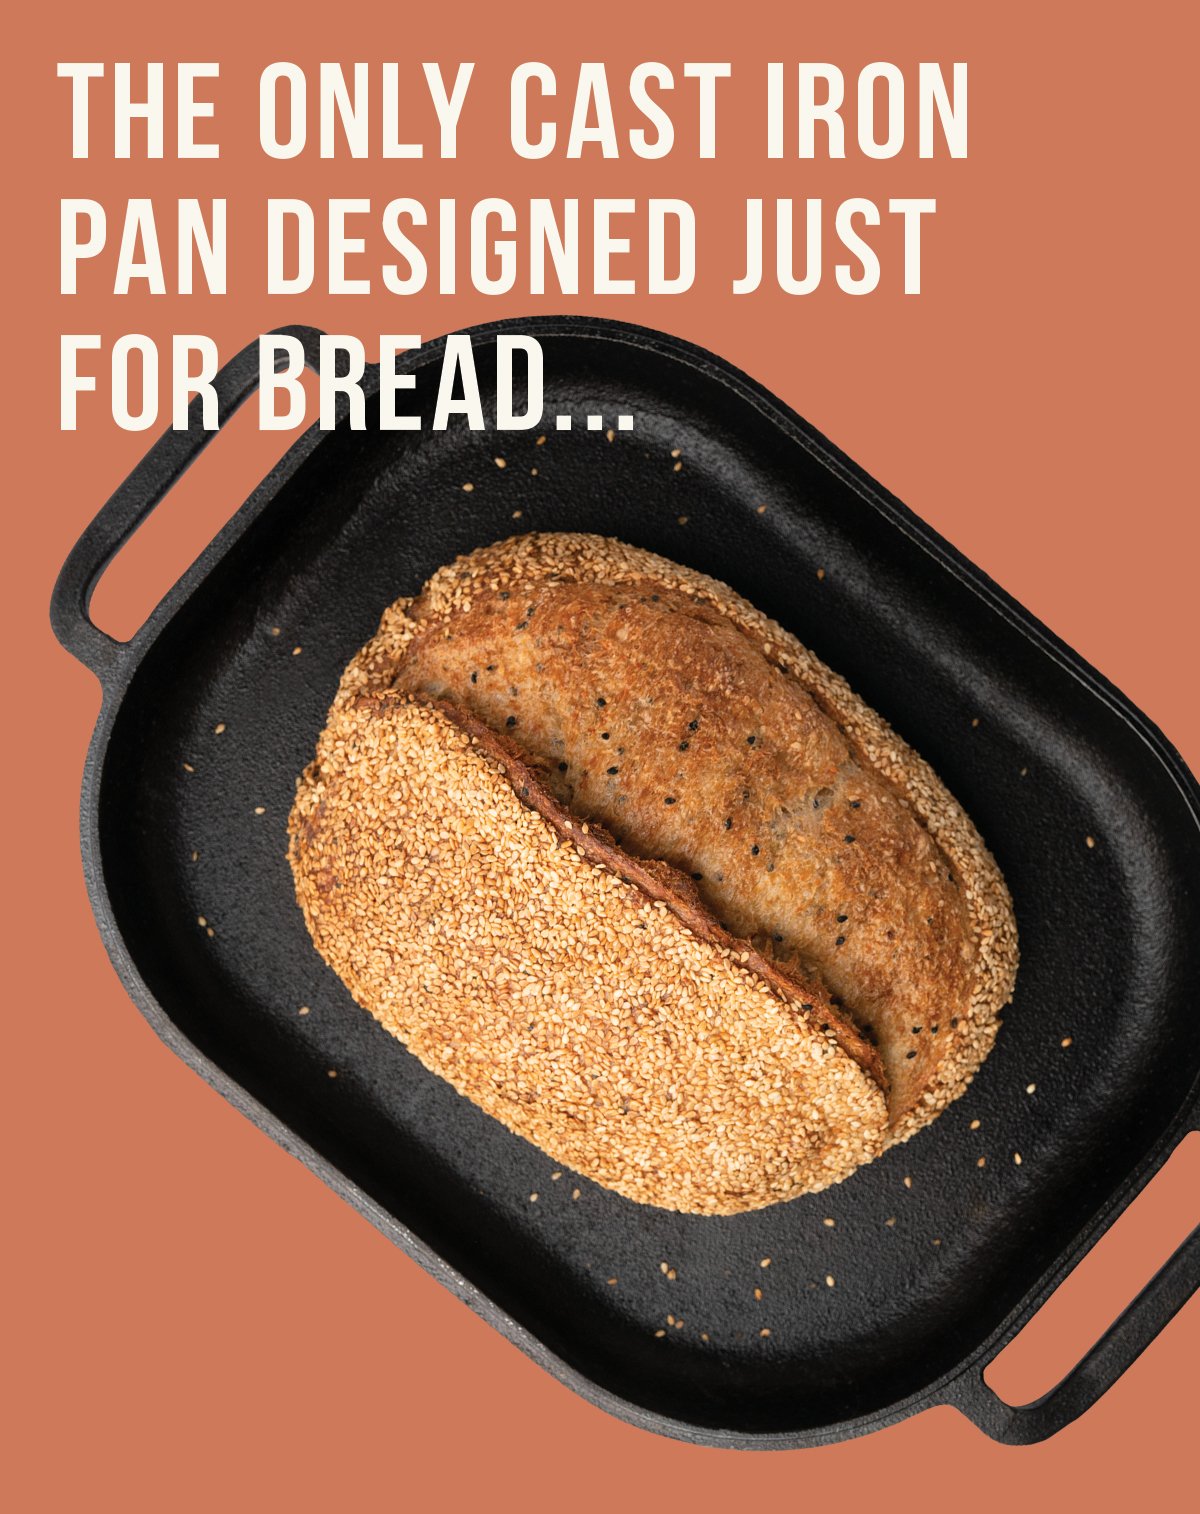 Challenger Breadware: The Mysteries of Baking: Solved